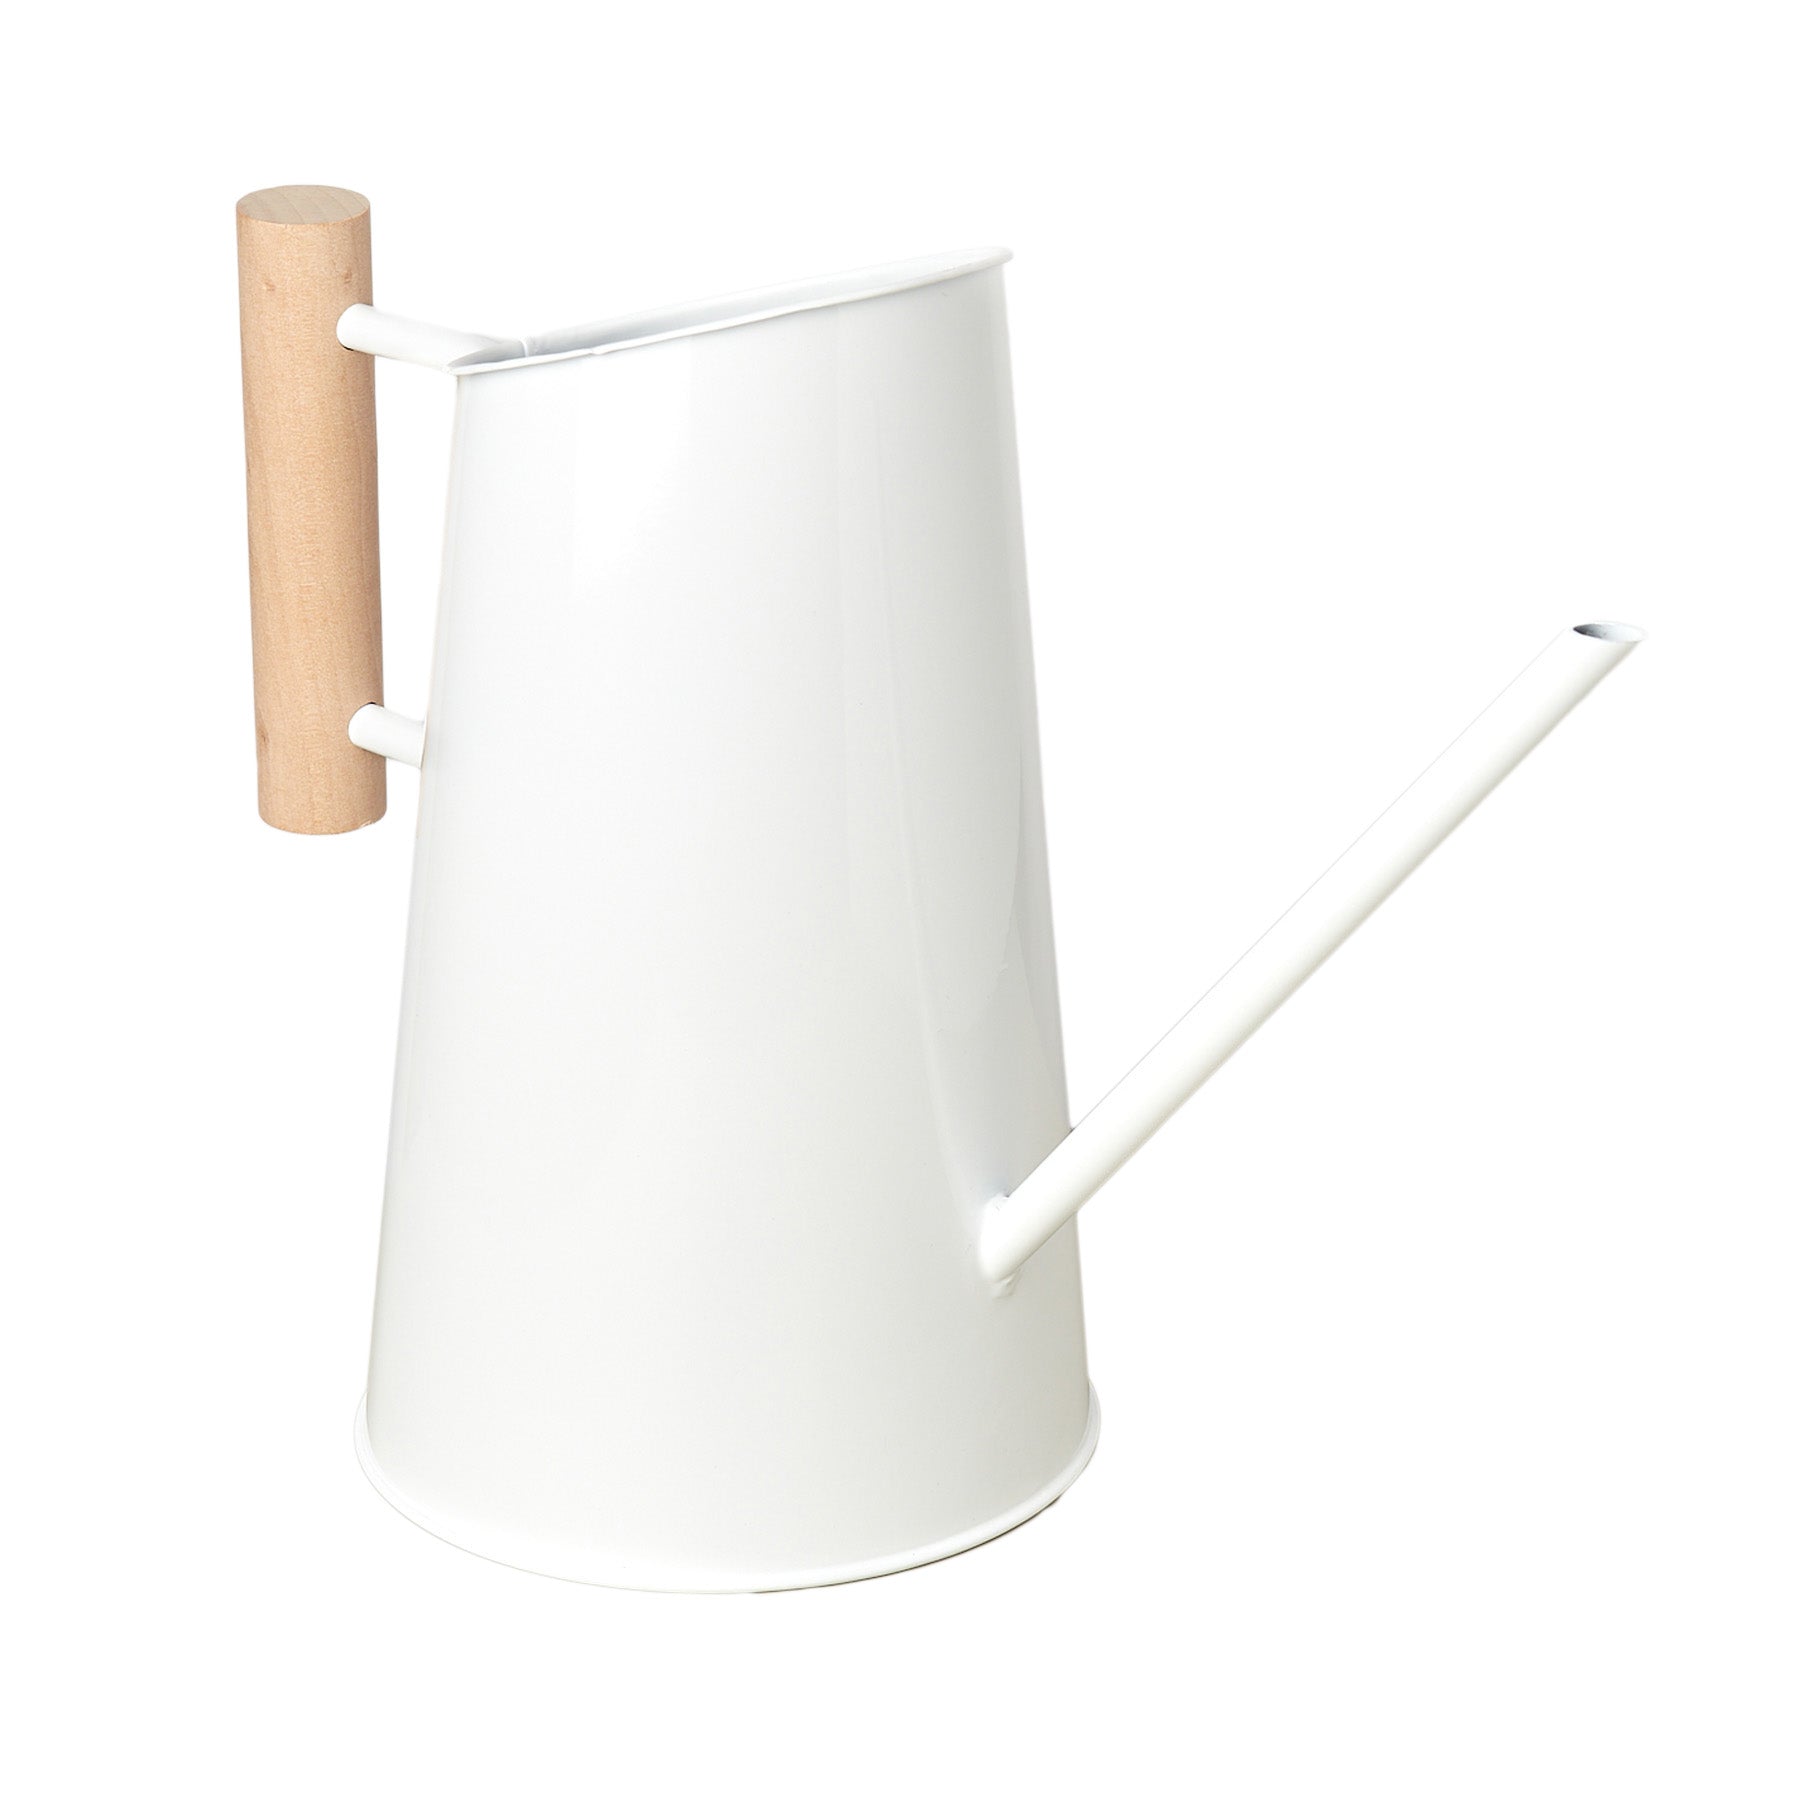 A white watering can with a wooden handle, perfect for any garden center.